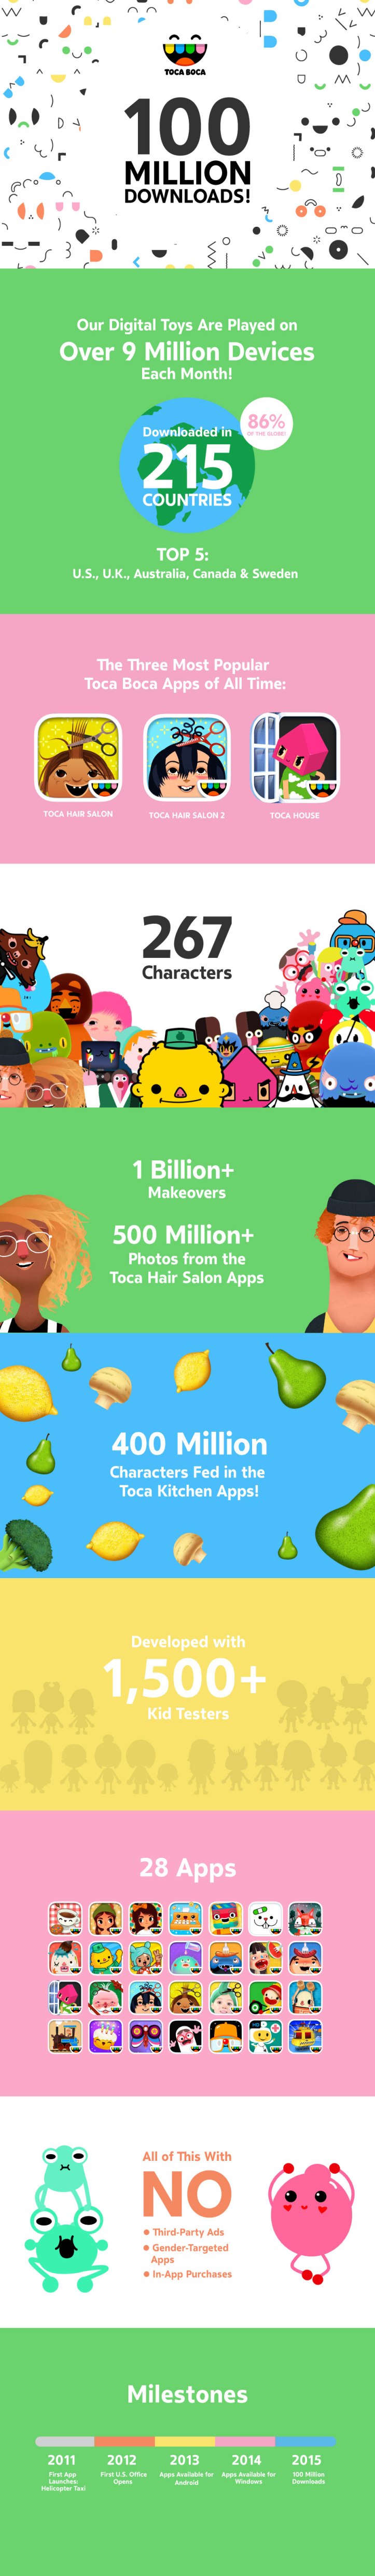 Infographic Shows Why Toca Boca is the No. 1 Mobile First Kids Brand ...